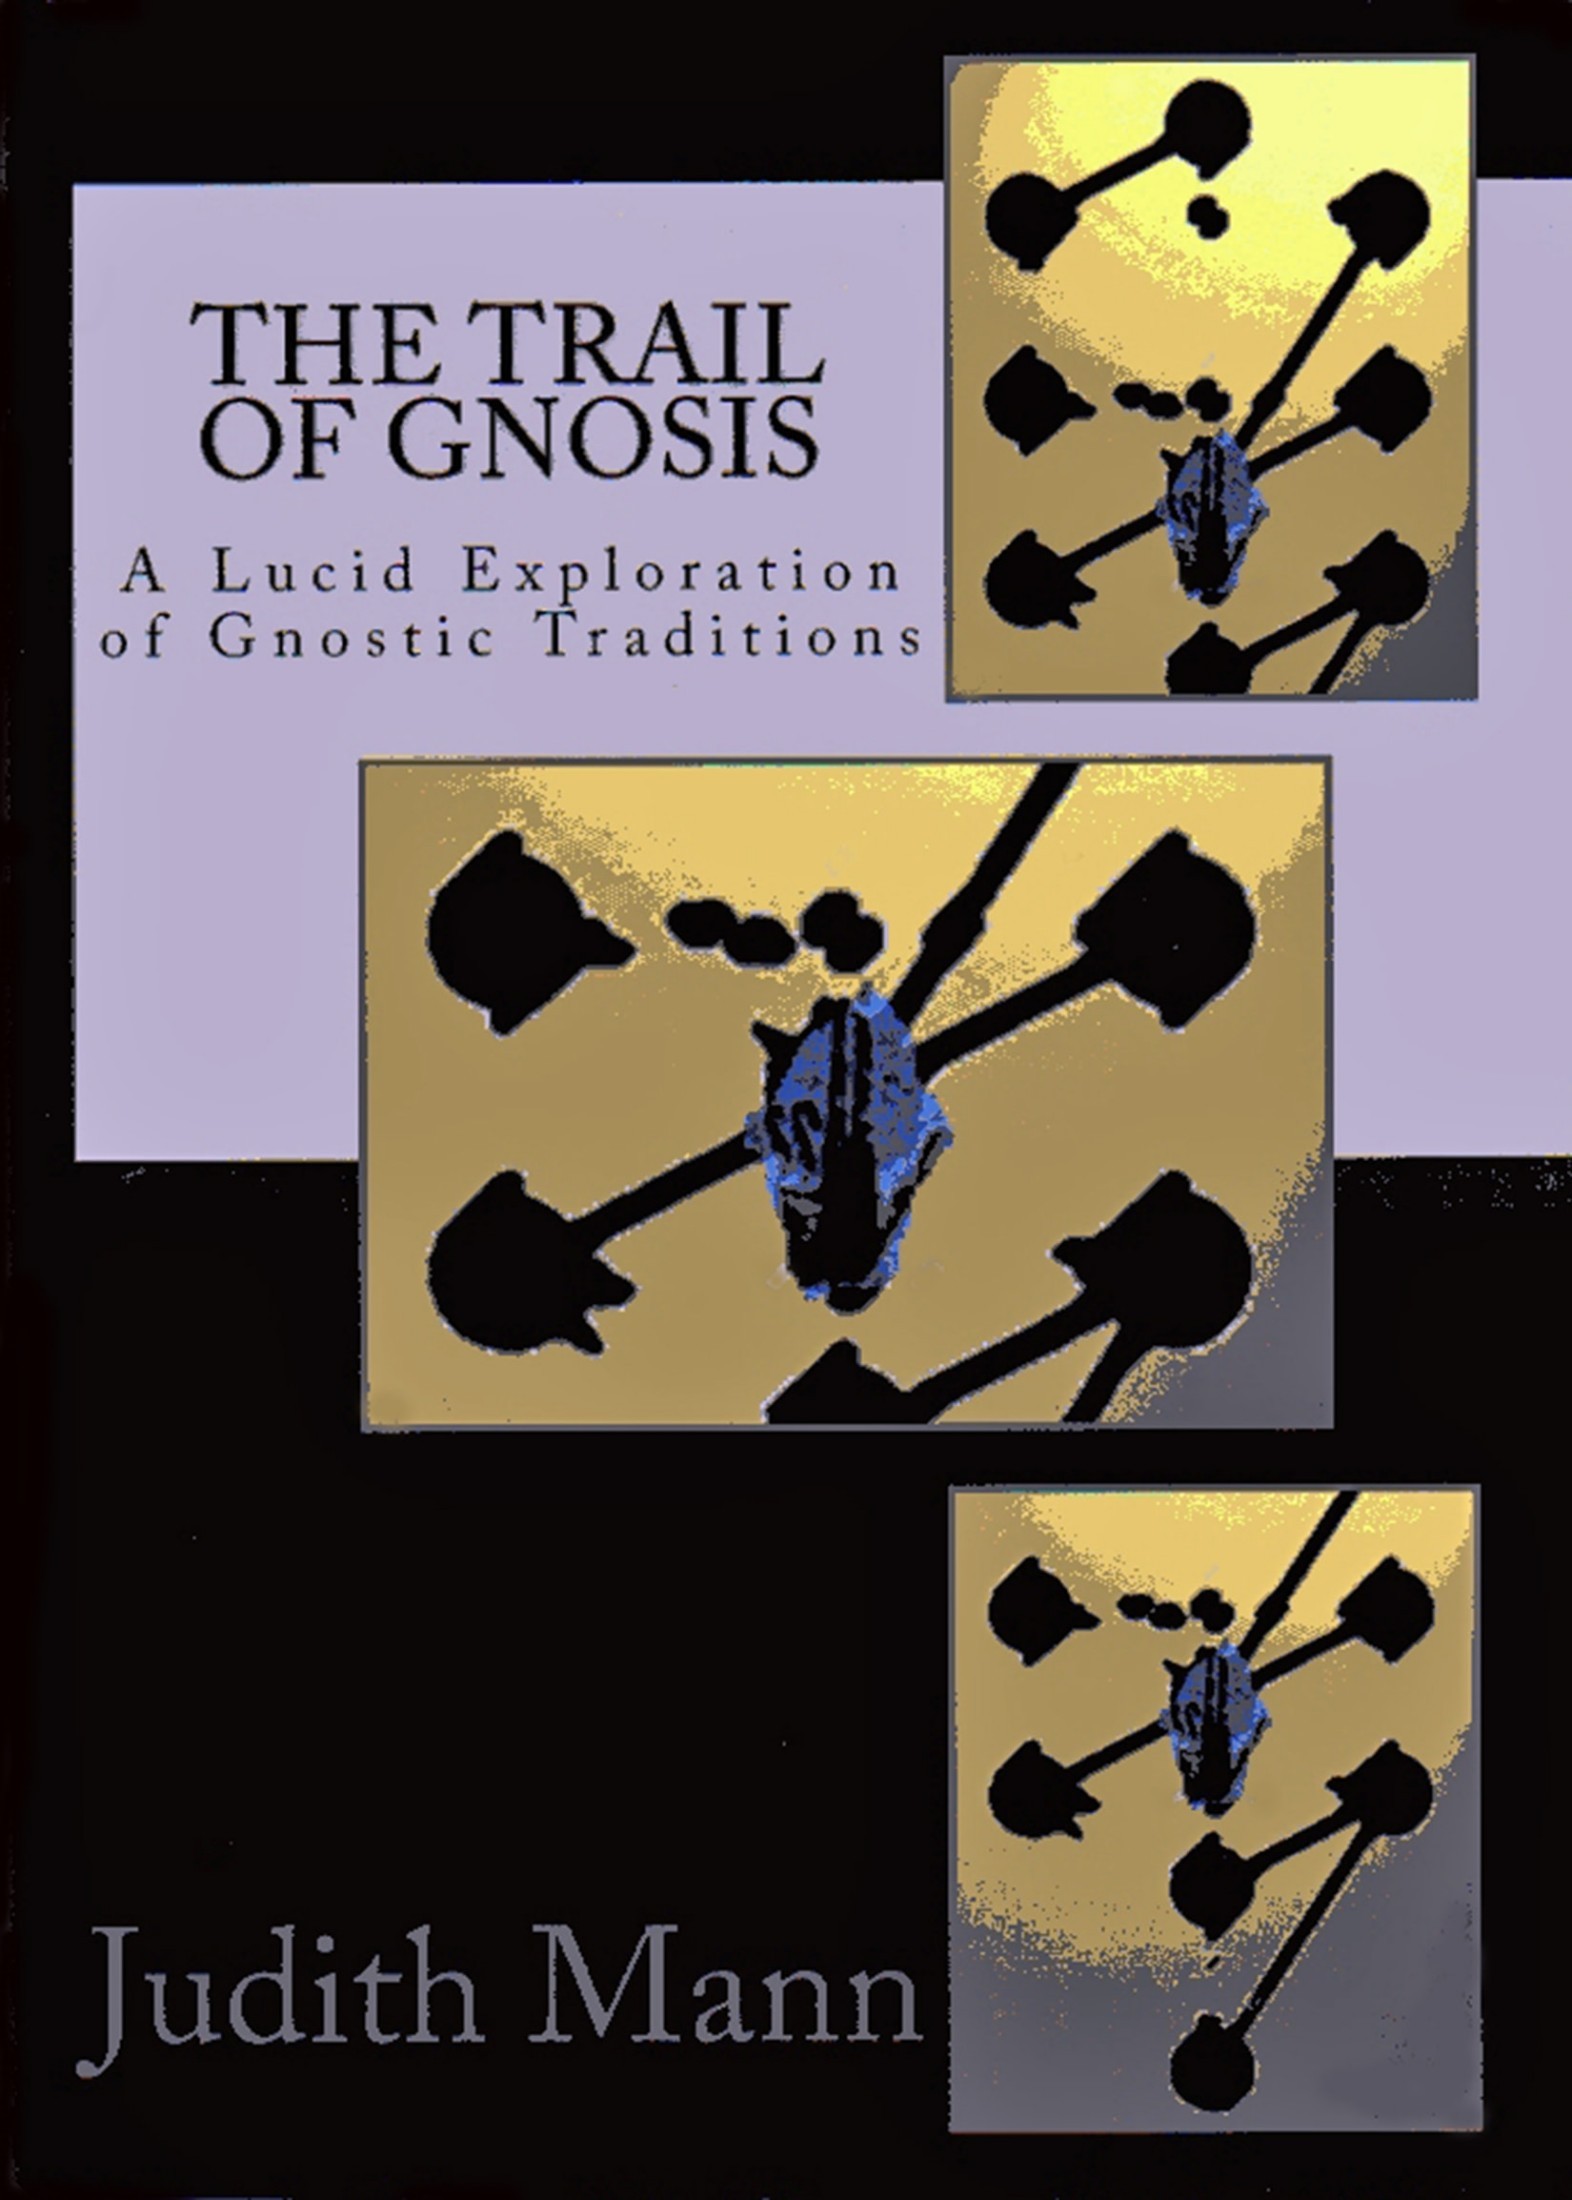 The Trail of Gnosis: A Lucid Exploration of Gnostic Traditions